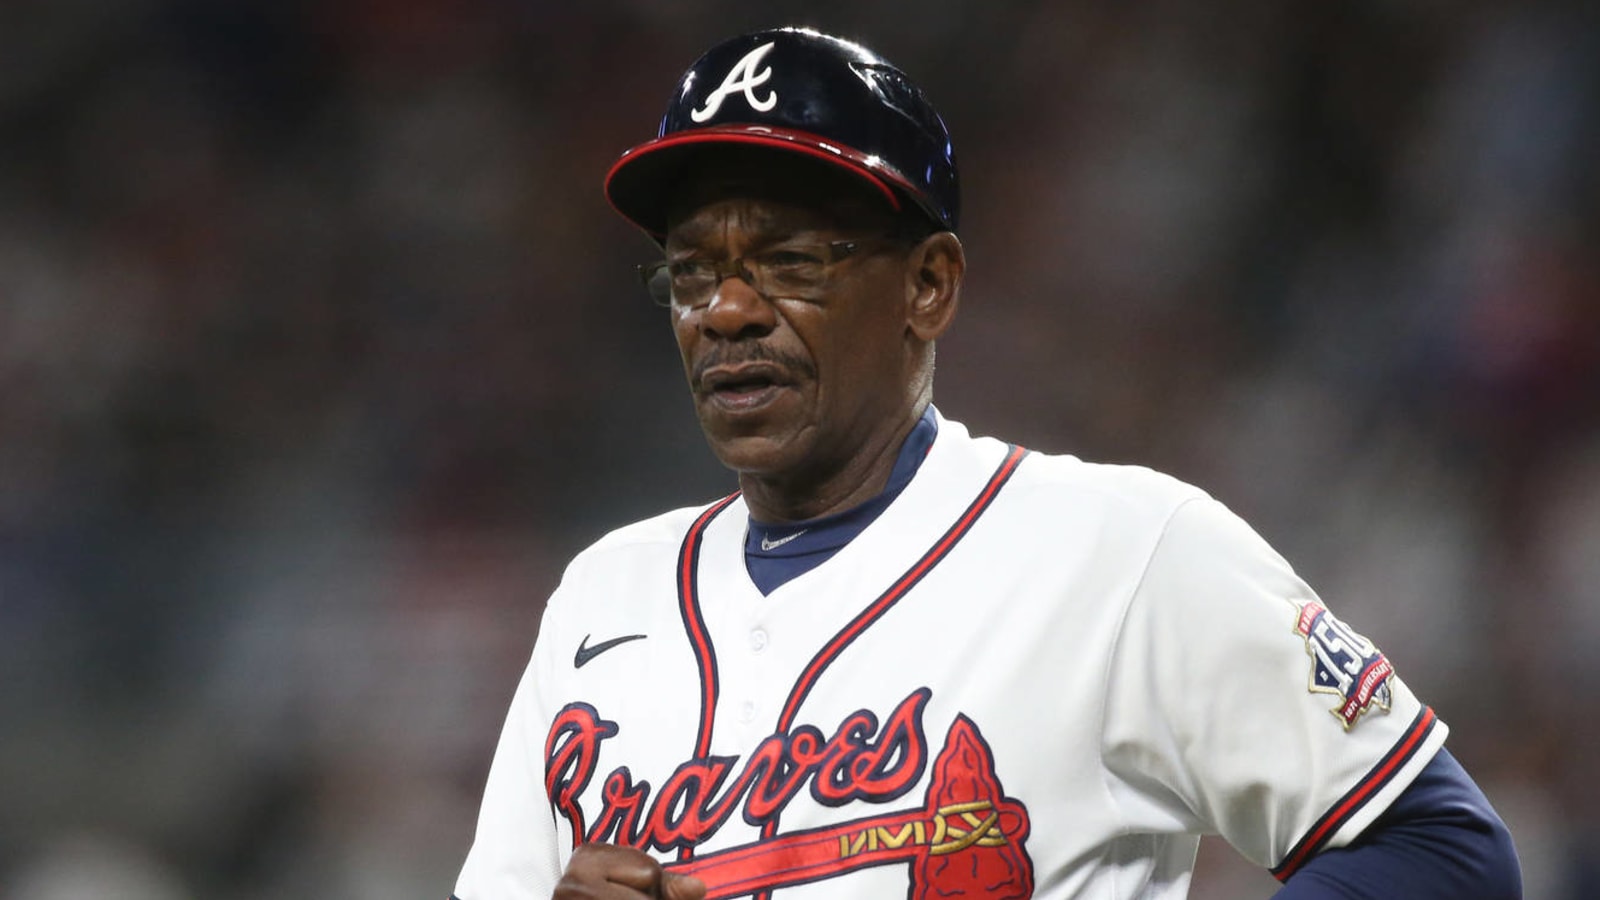 Braves third base coach Ron Washington a candidate for open manager job in Oakland?